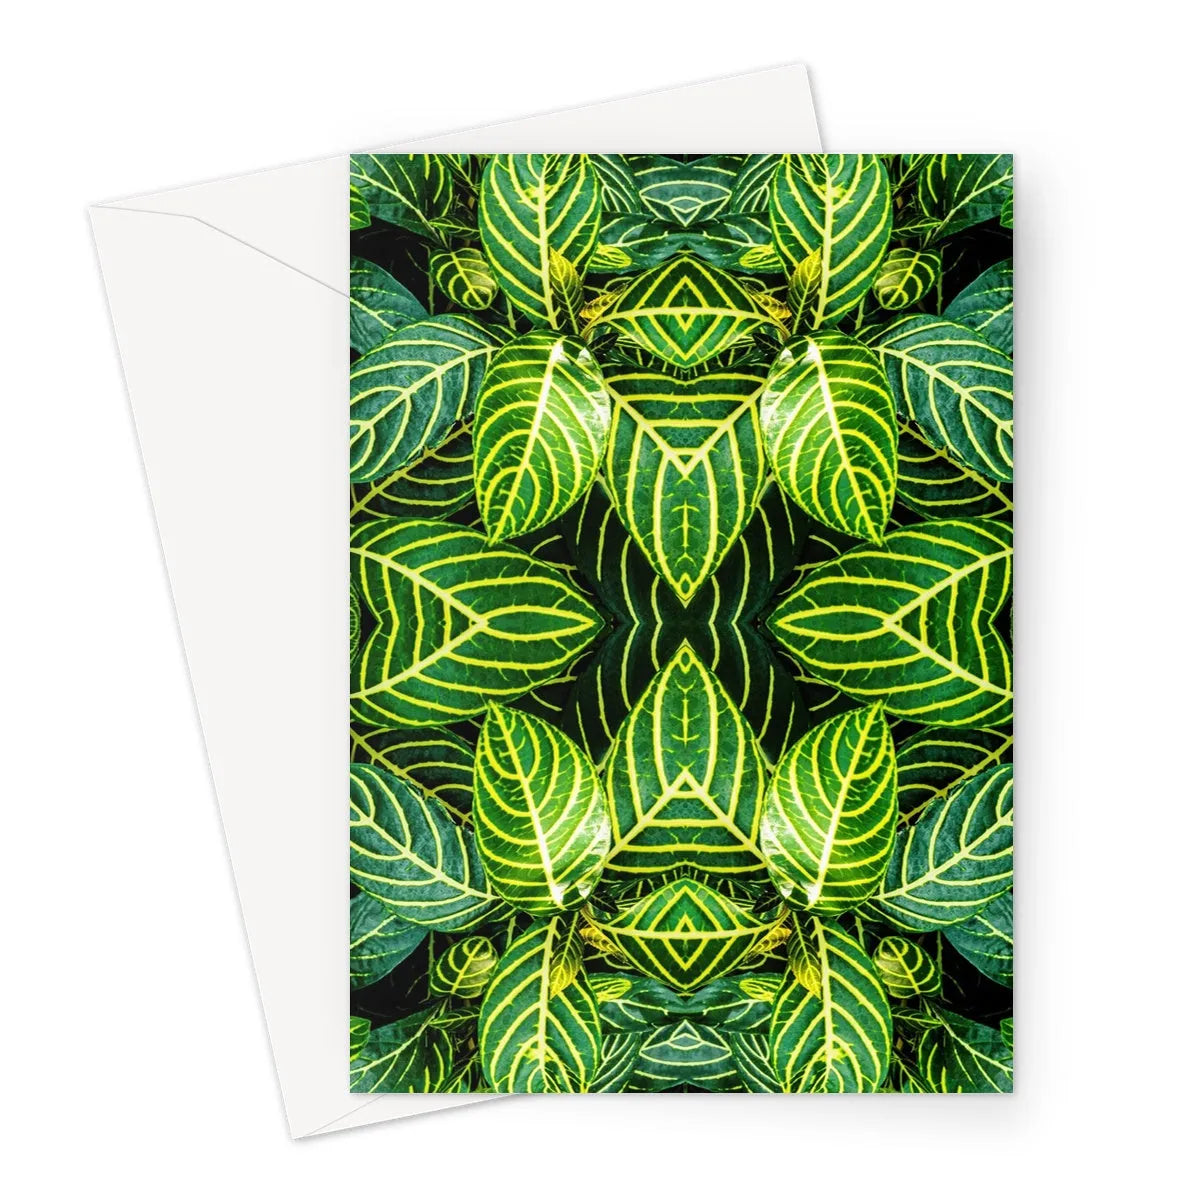 Just The Headlines Greeting Card - Trippy Leaf Art - A5 Portrait / 1 Card - Greeting & Note Cards - Aesthetic Art